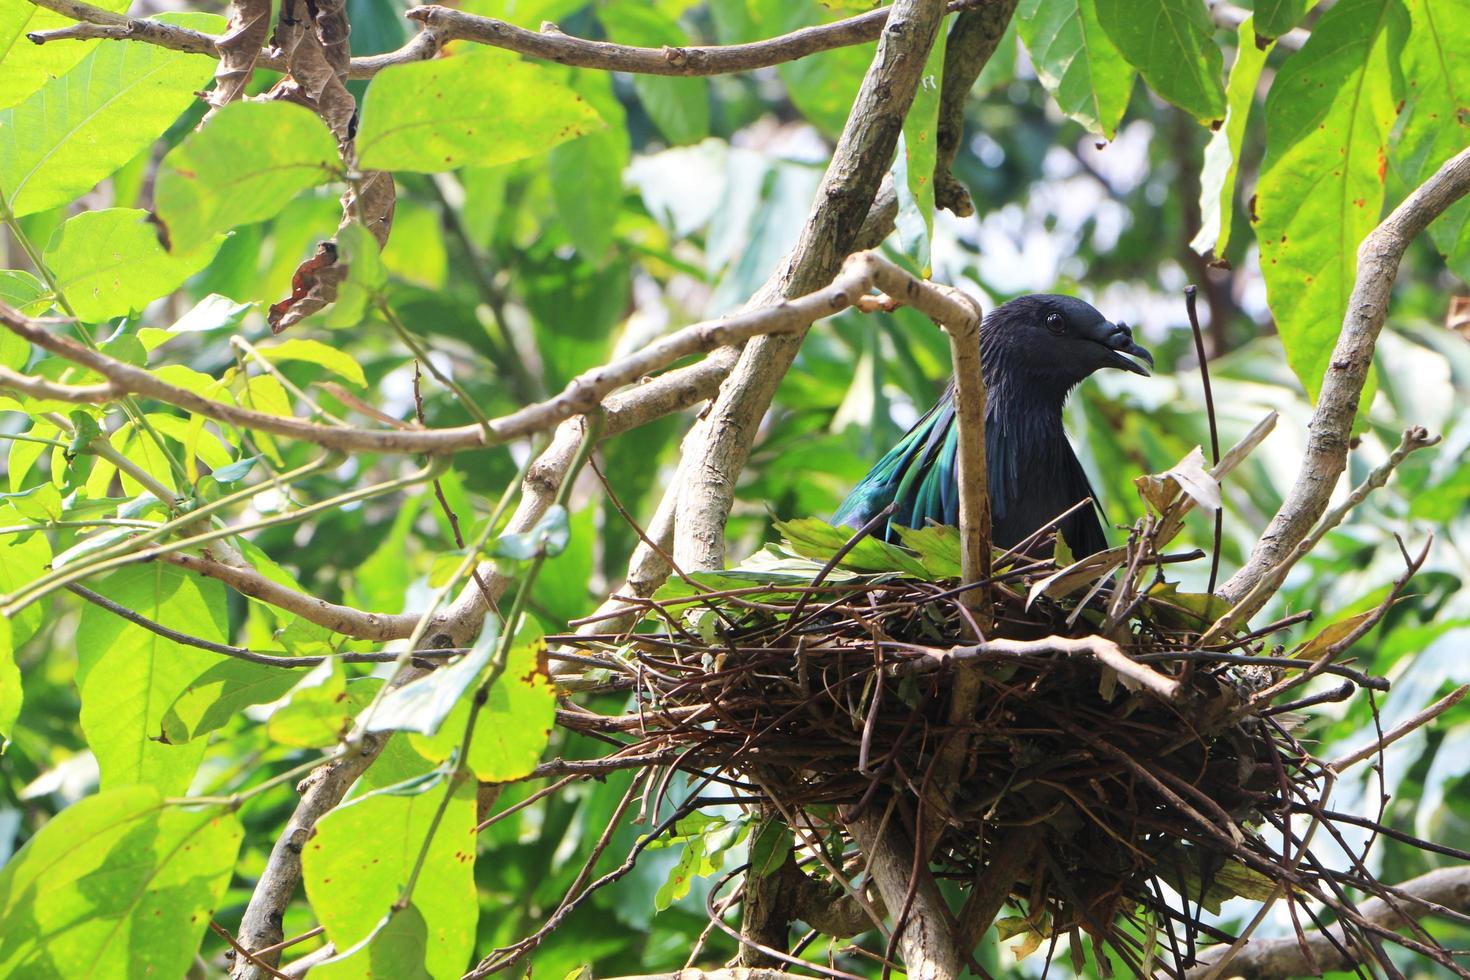 Nicobar Pigeon hatching in the nest on the branches in the forest. photo